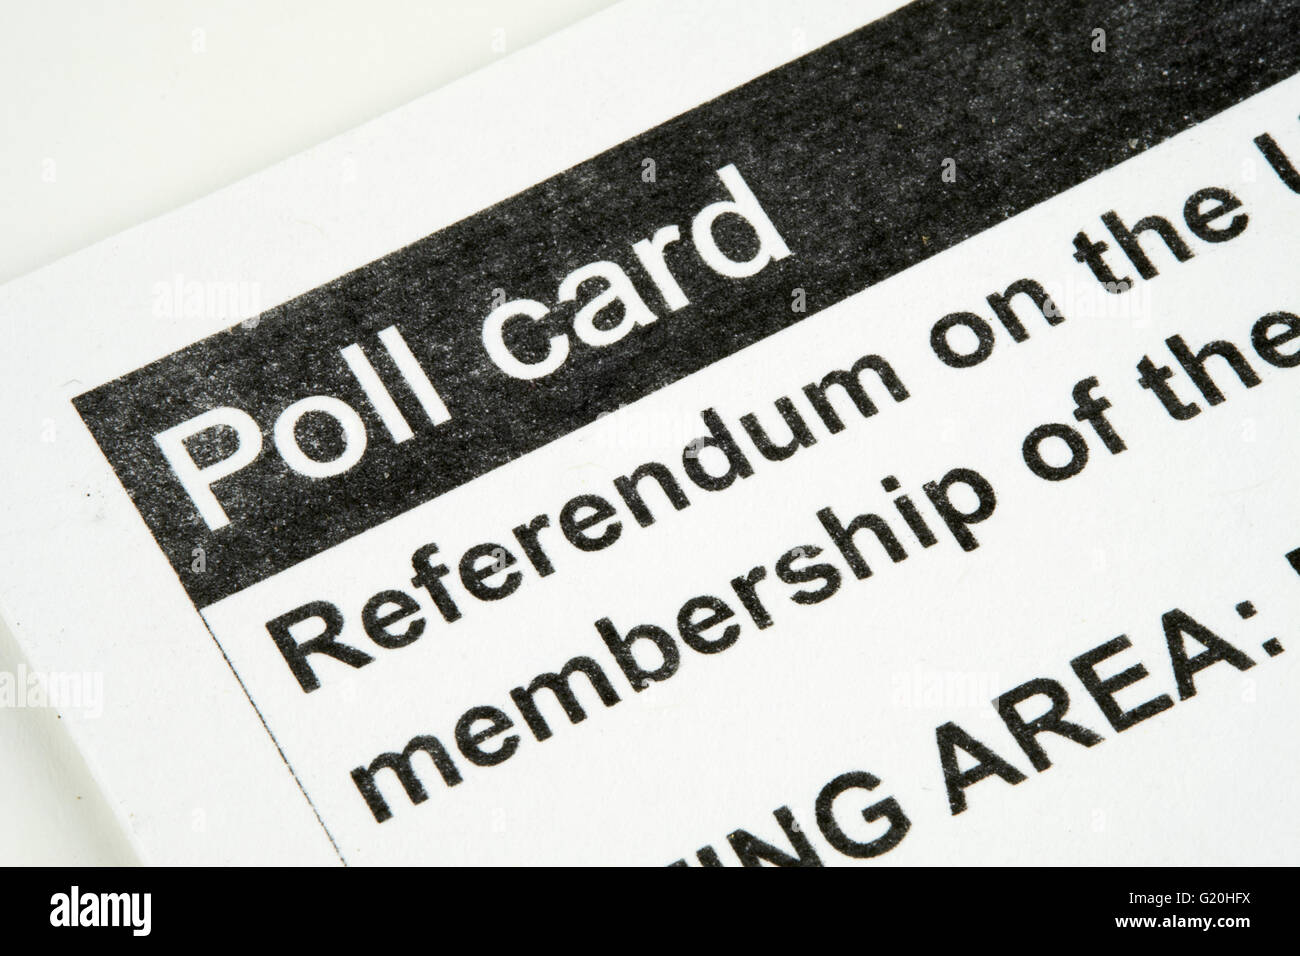 Poll Card For The Referendum On The United Kingdom's Membership Of The European Union Stock Photo